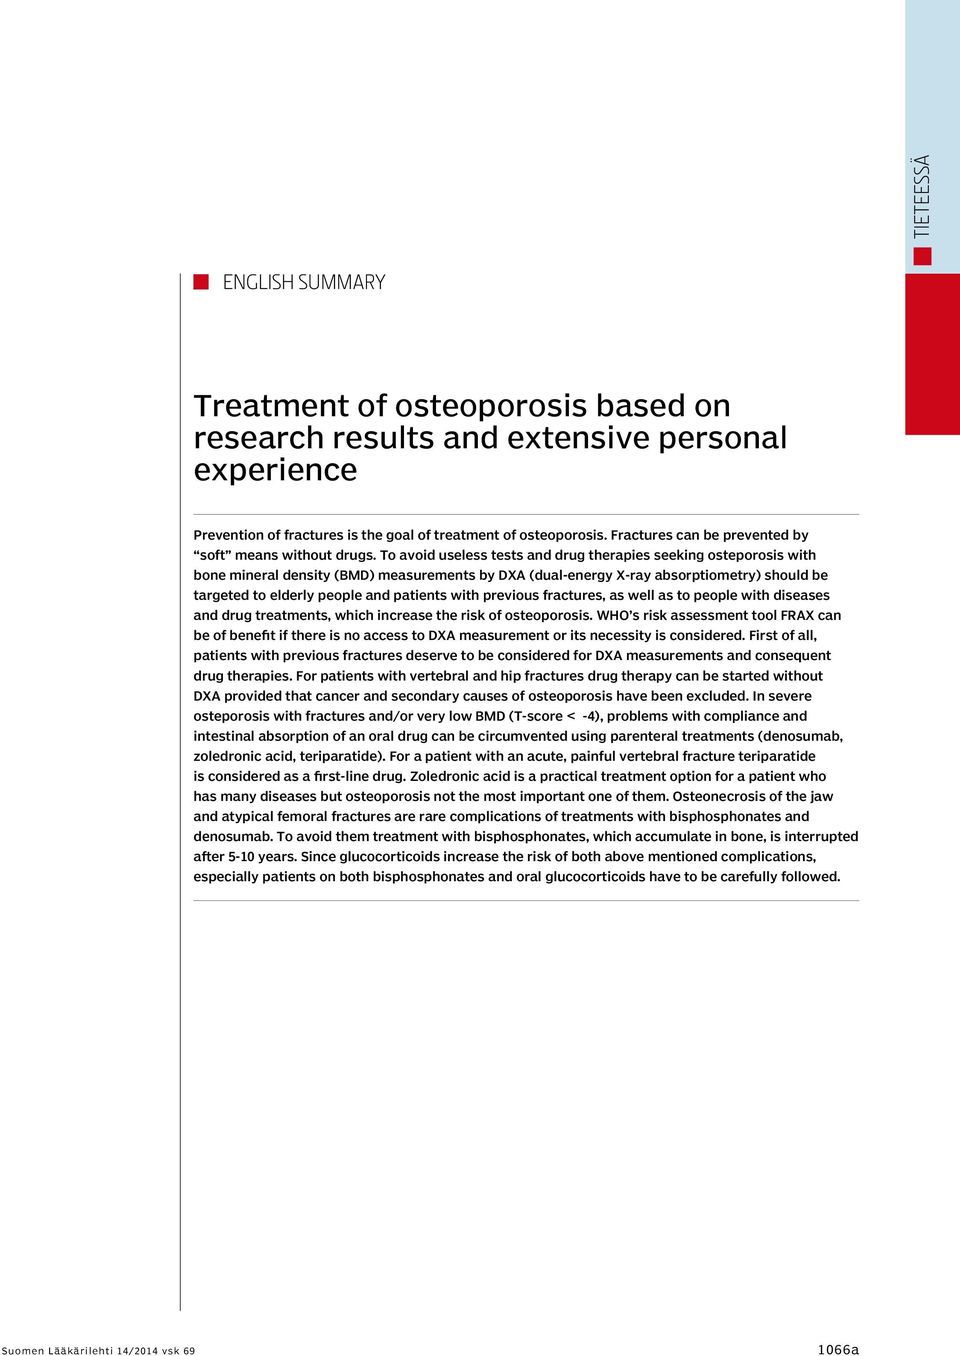 To avoid useless tests and drug therapies seeking osteporosis with bone mineral density (BMD) measurements by DXA (dual-energy X-ray absorptiometry) should be targeted to elderly people and patients